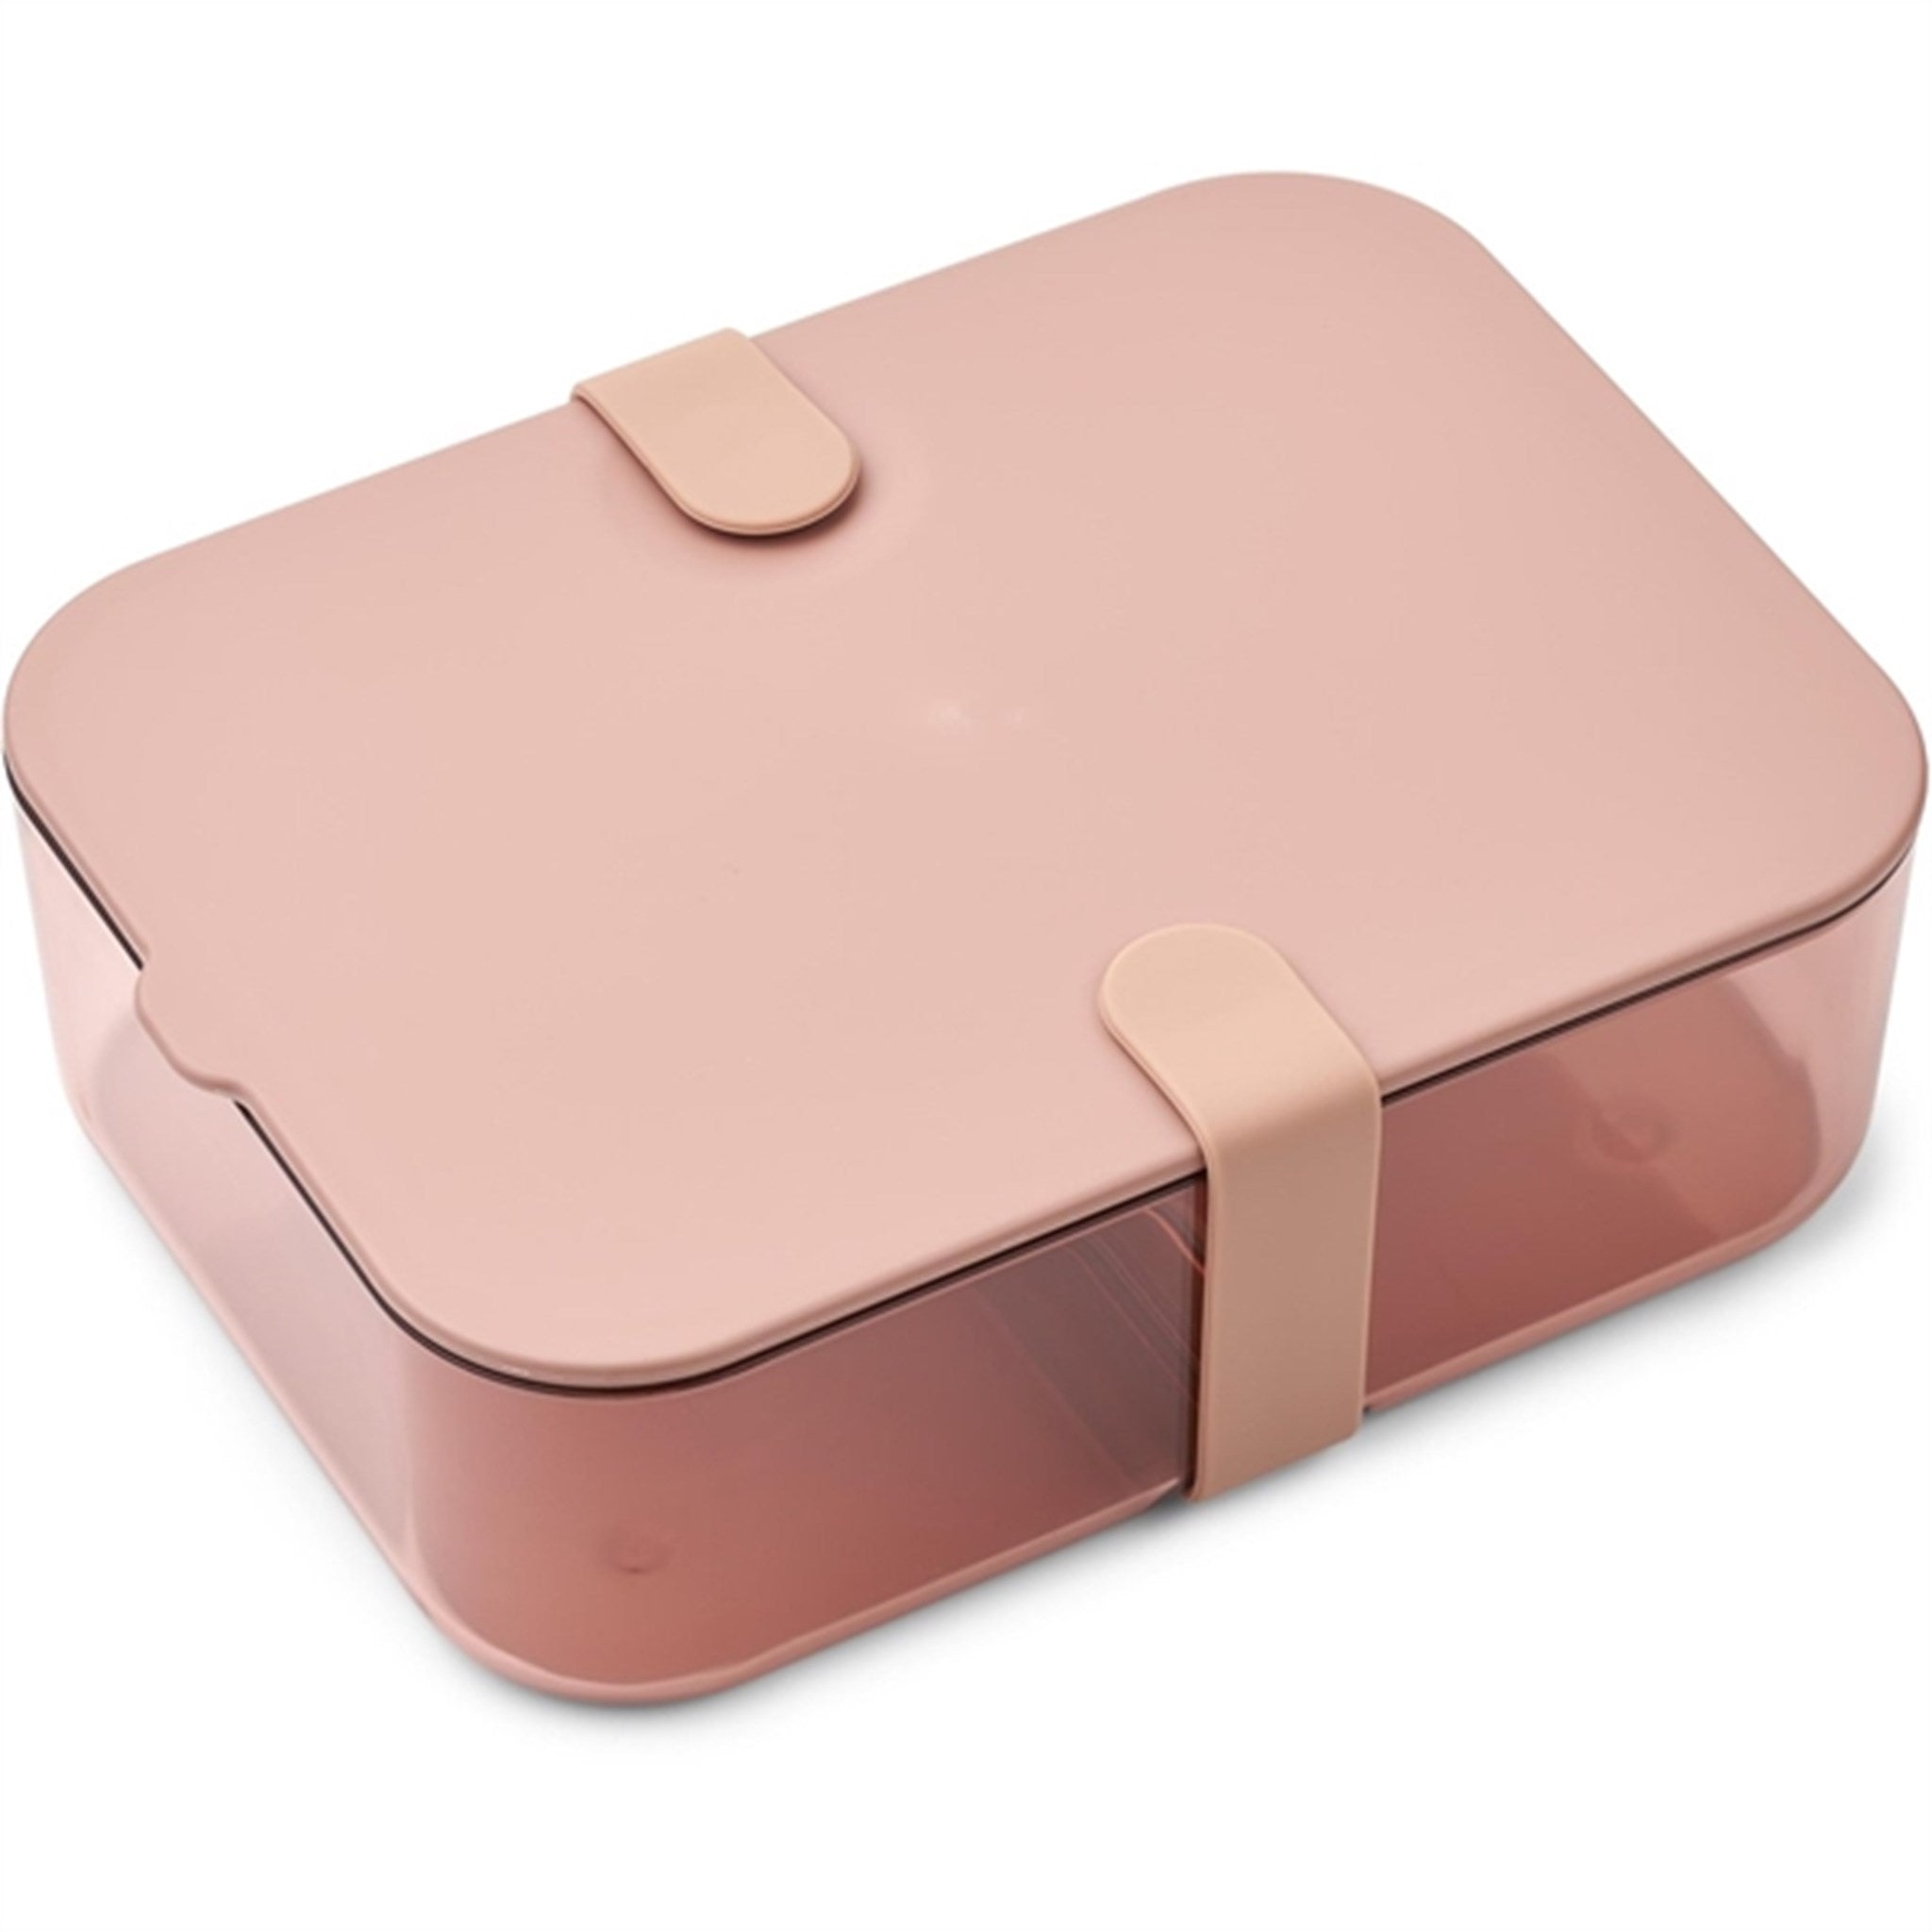 Liewood Carin Lunch Box Large Tuscany Rose/Dusty Raspberry